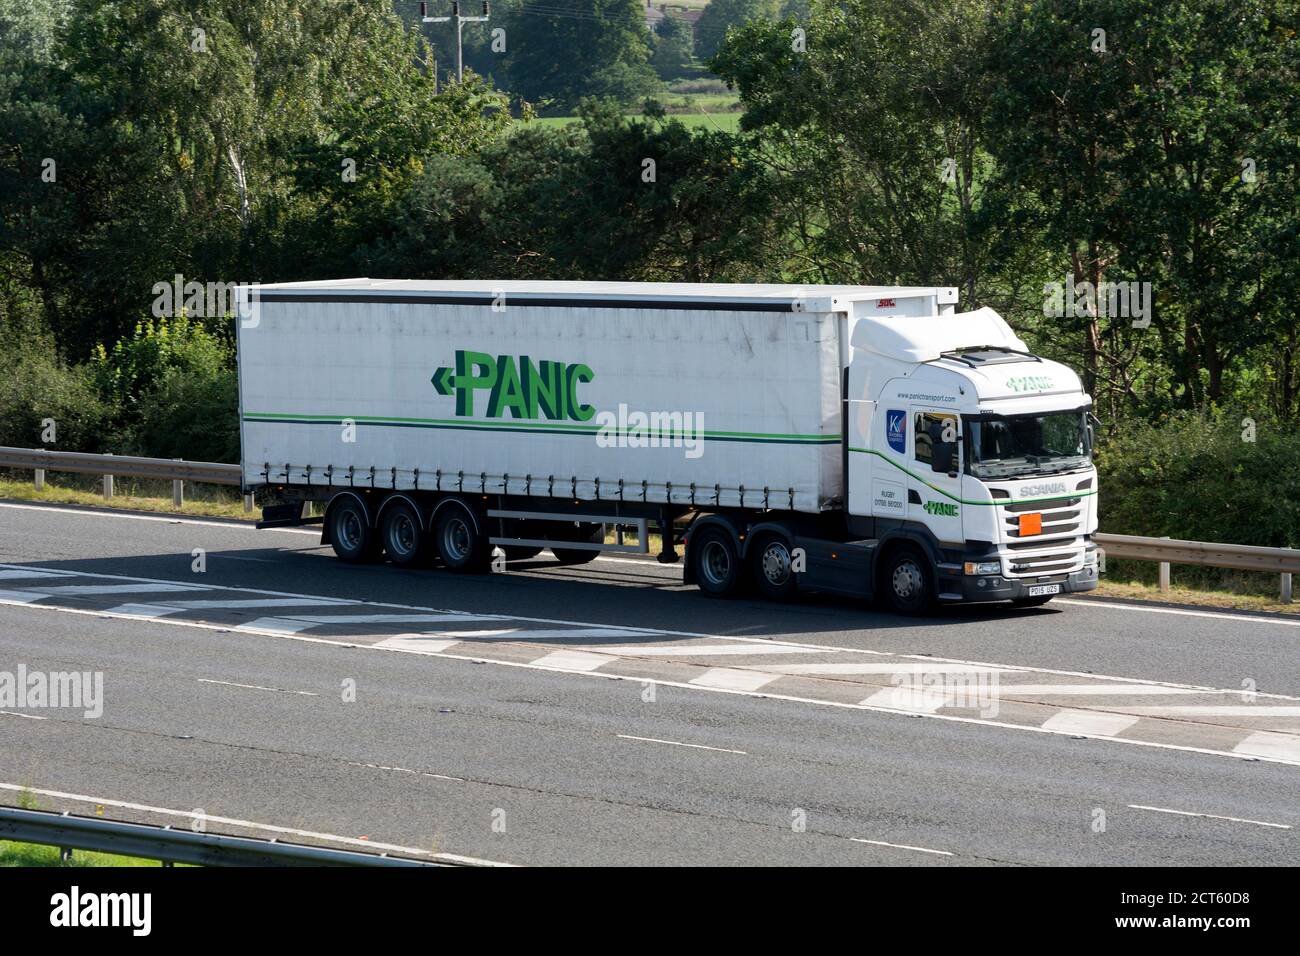 A Panic lorry leaving the M40 motorway at Junction 15, Warwick, UK Stock Photo